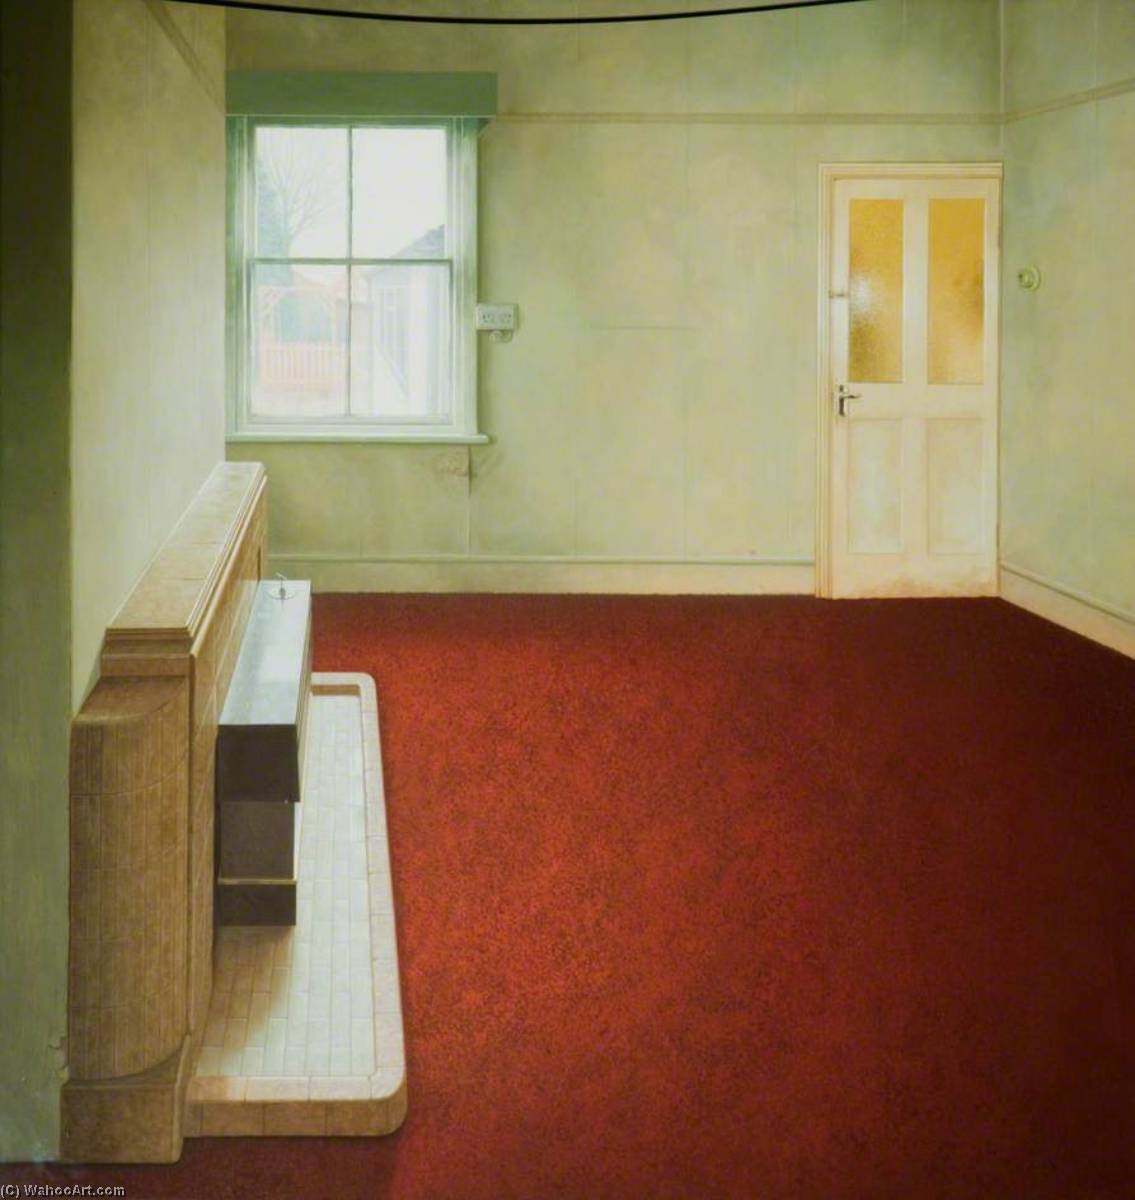 Memorial Painting (left wing of diptych), 1998 by Andrew Tift Andrew Tift | ArtsDot.com